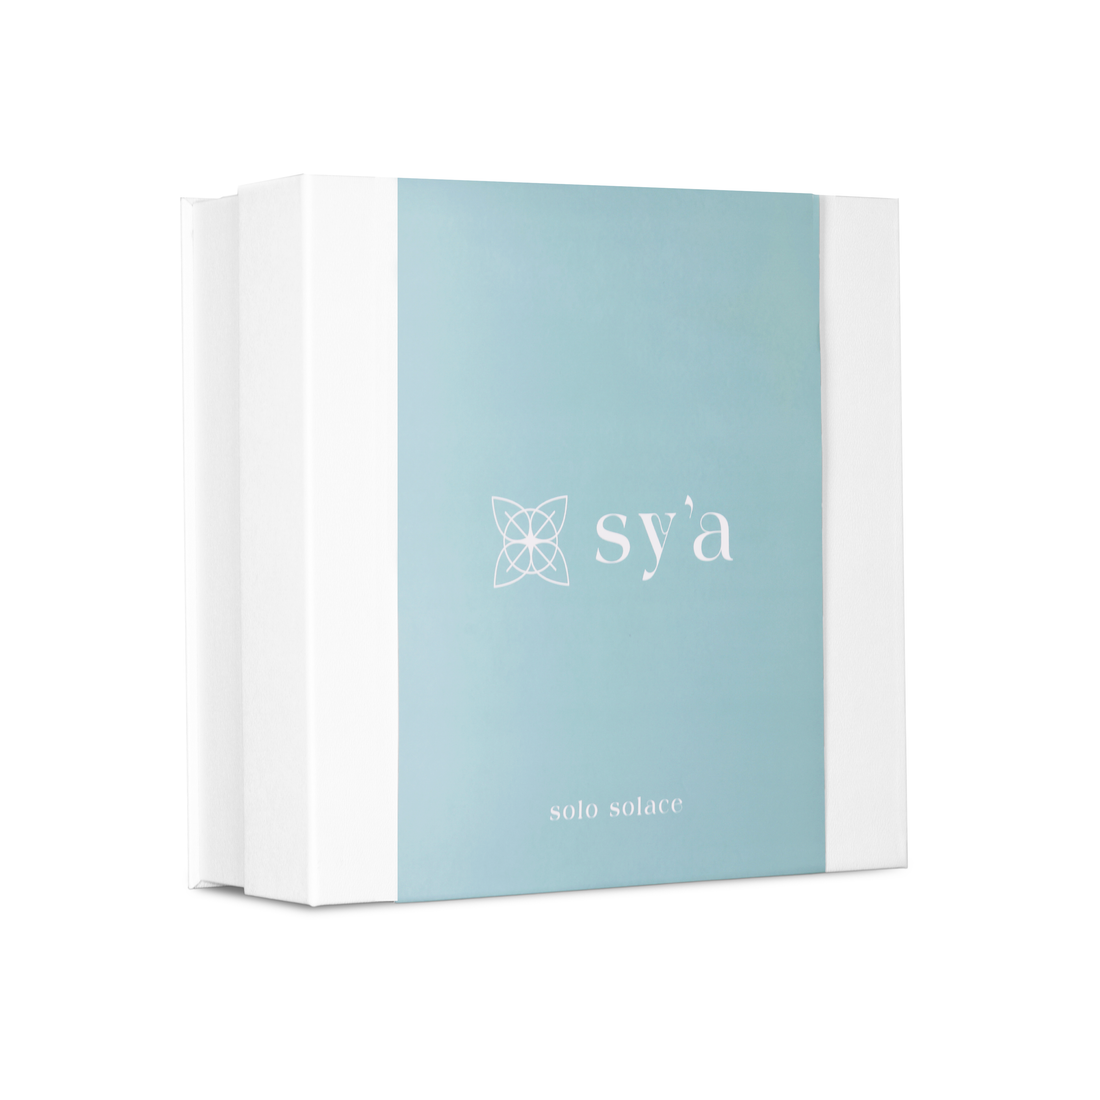 sy’a solo solace - green teas